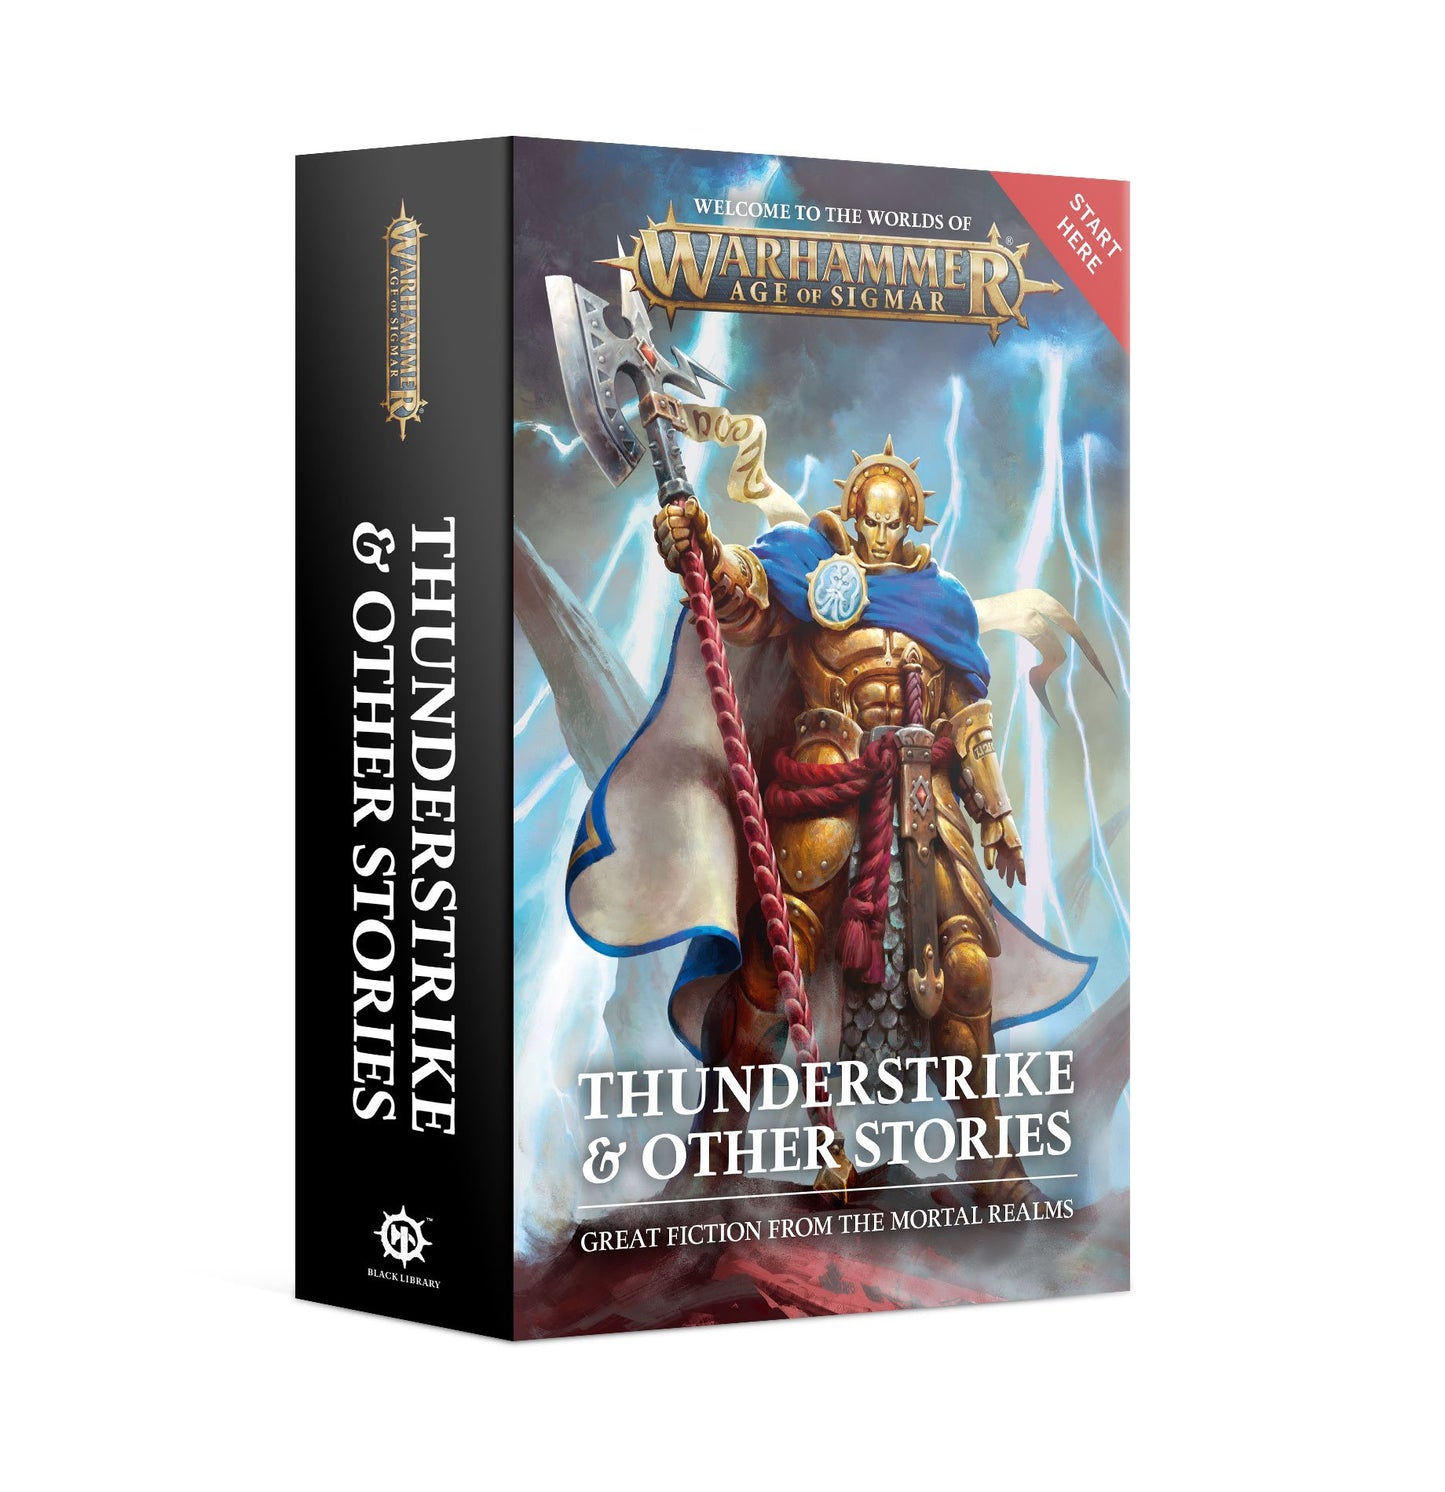 AGE OF SIGMAR THUNDERSTRIKE & OTHER STORIES